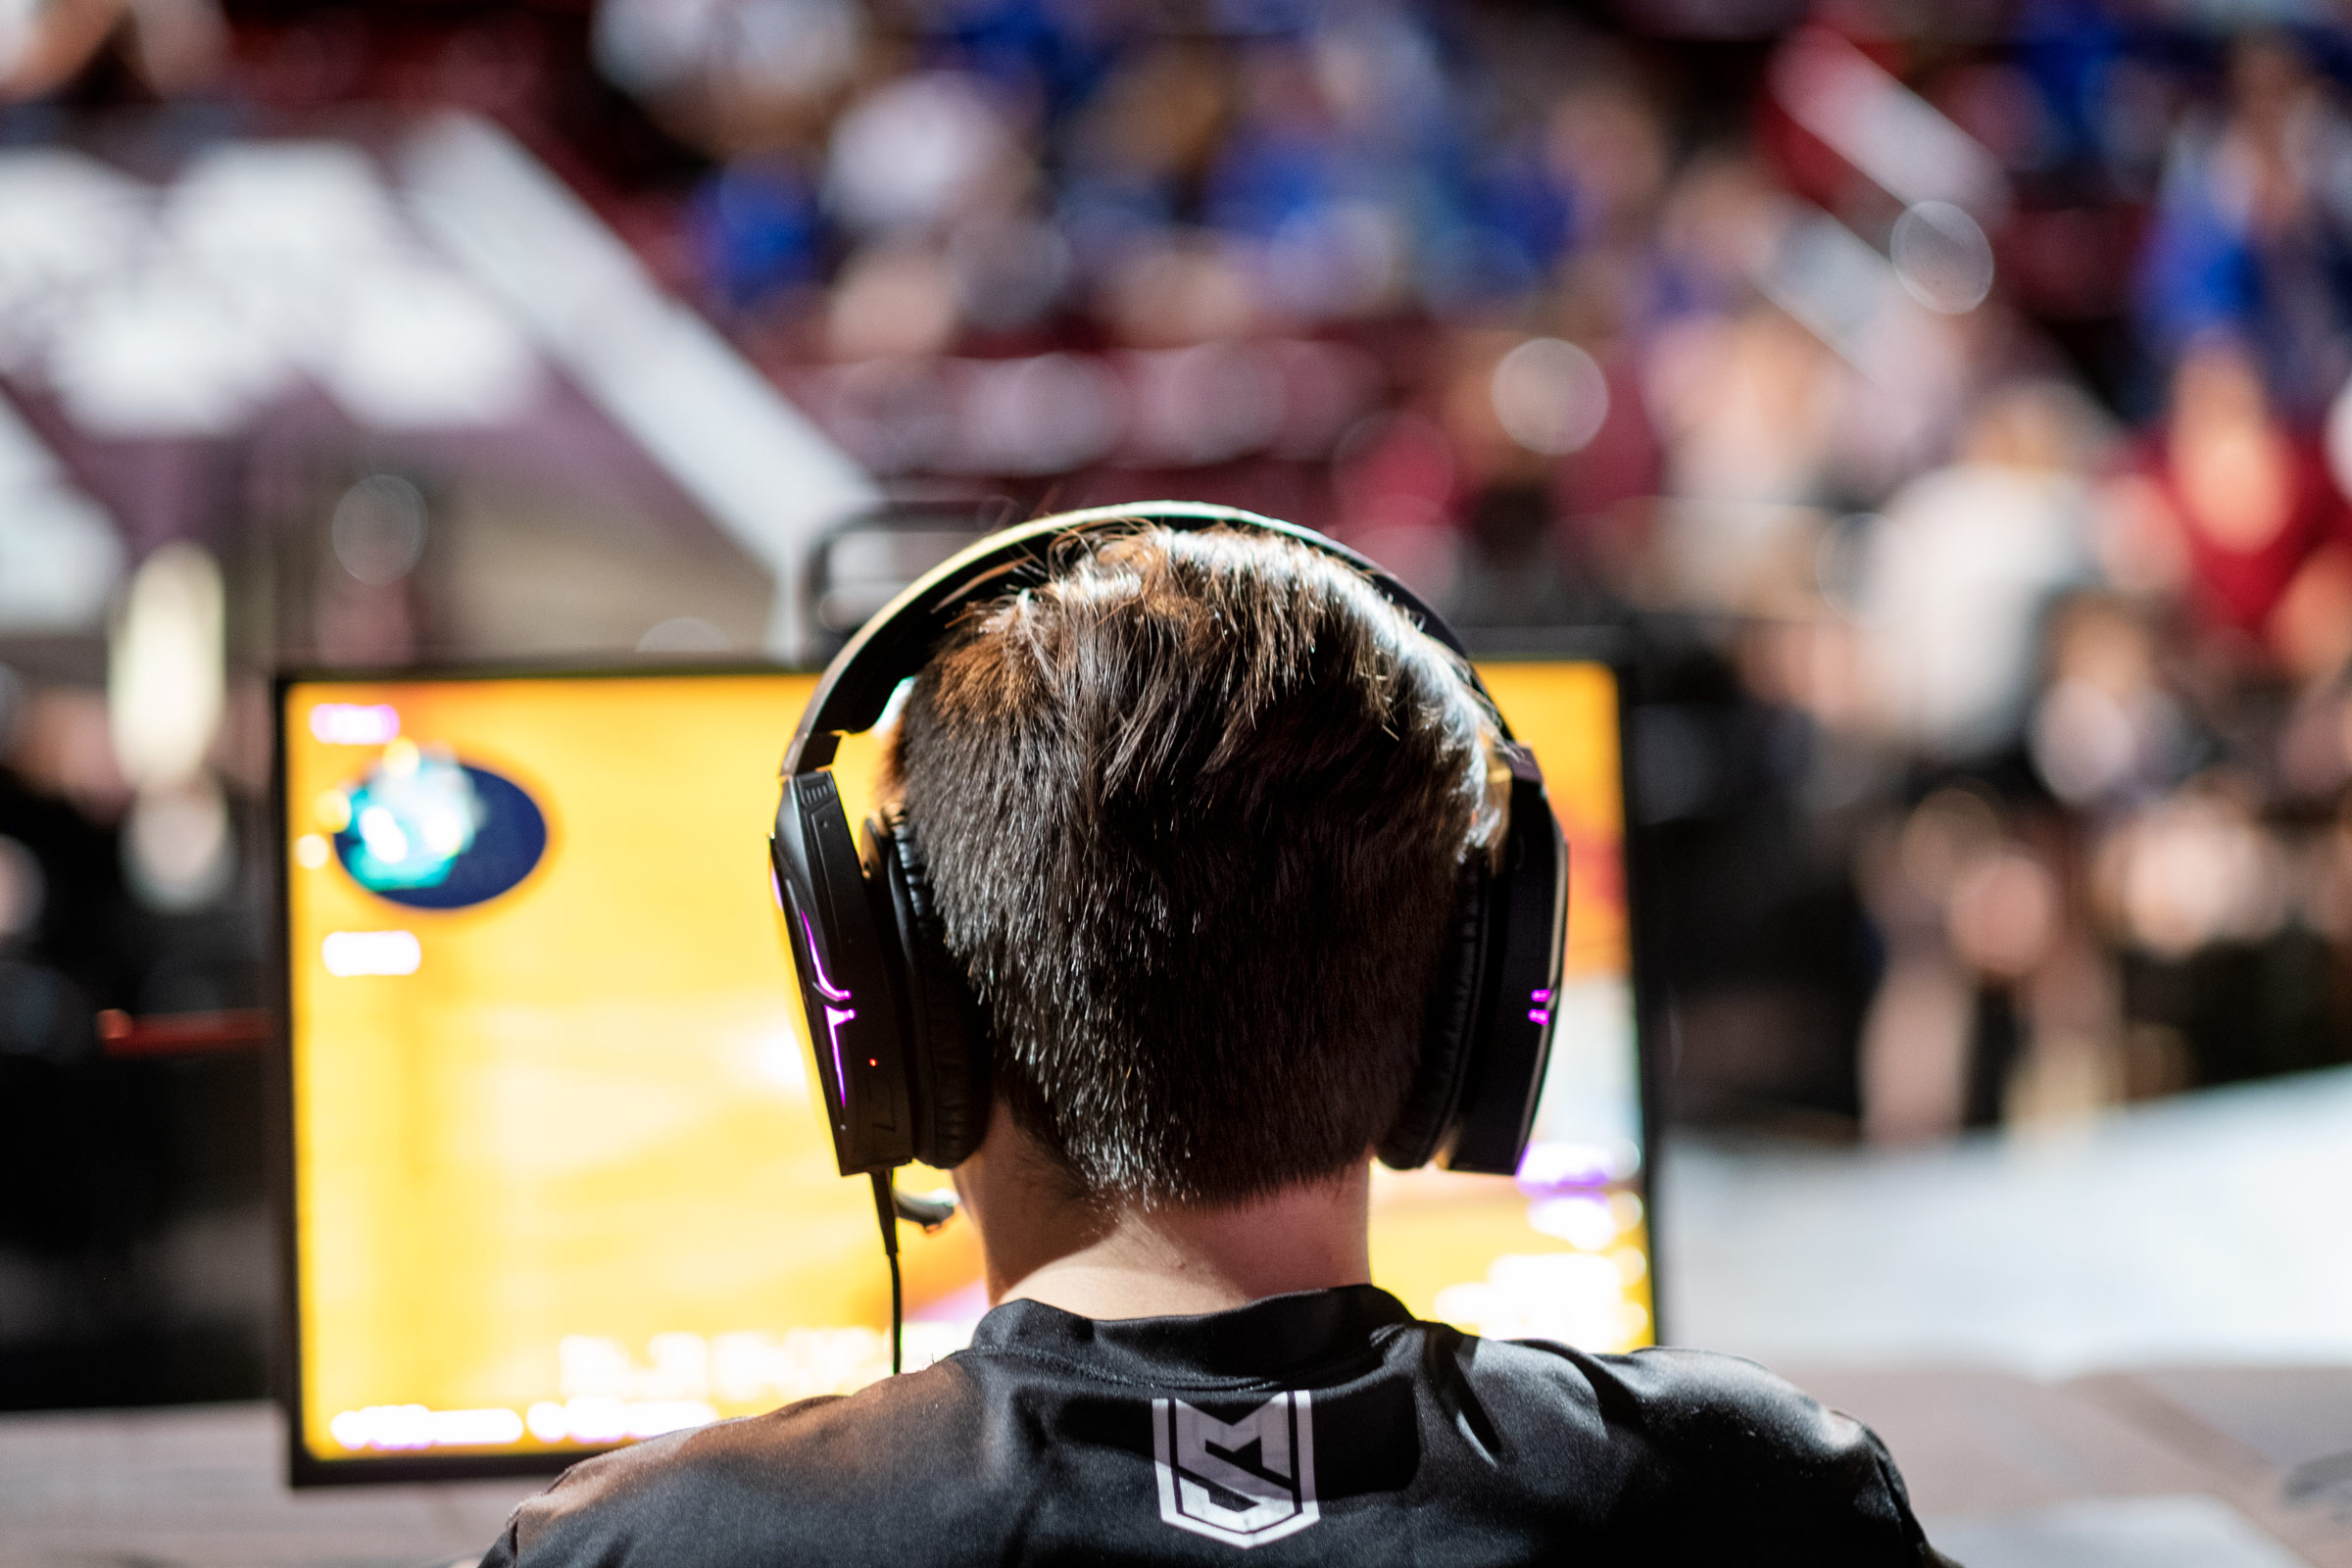 Wearing headphones and framed by the glow of a yellow computer screen, an MSU student eSports team member competes at the Hump.